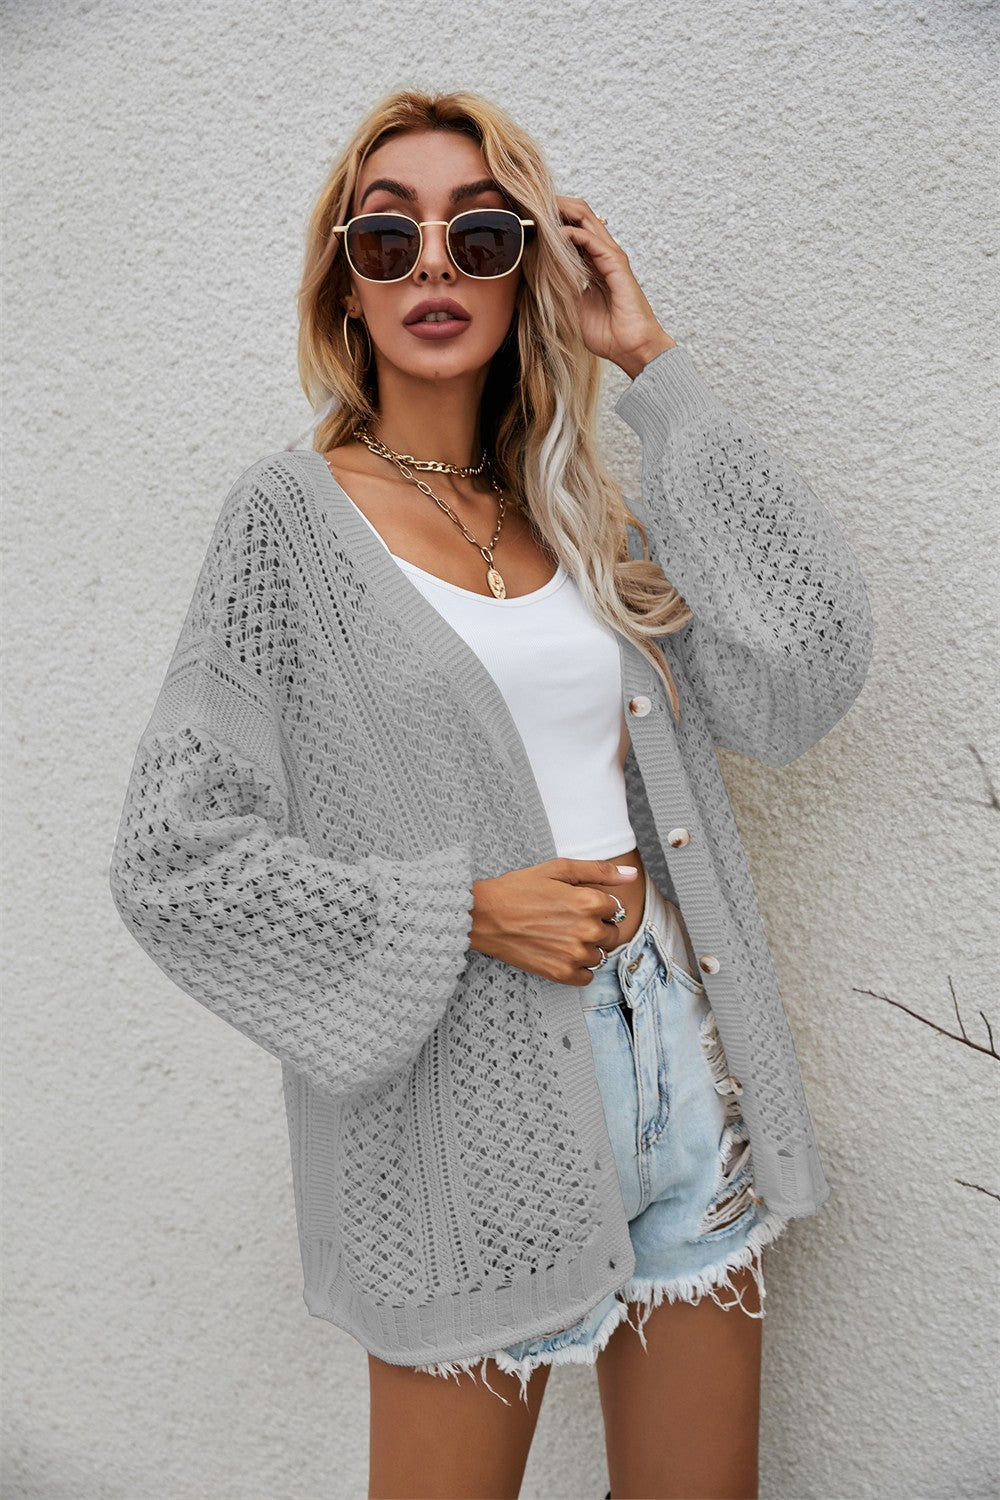 Openwork V-Neck Dropped Shoulder Cardigan - Women’s Clothing & Accessories - Shirts & Tops - 17 - 2024